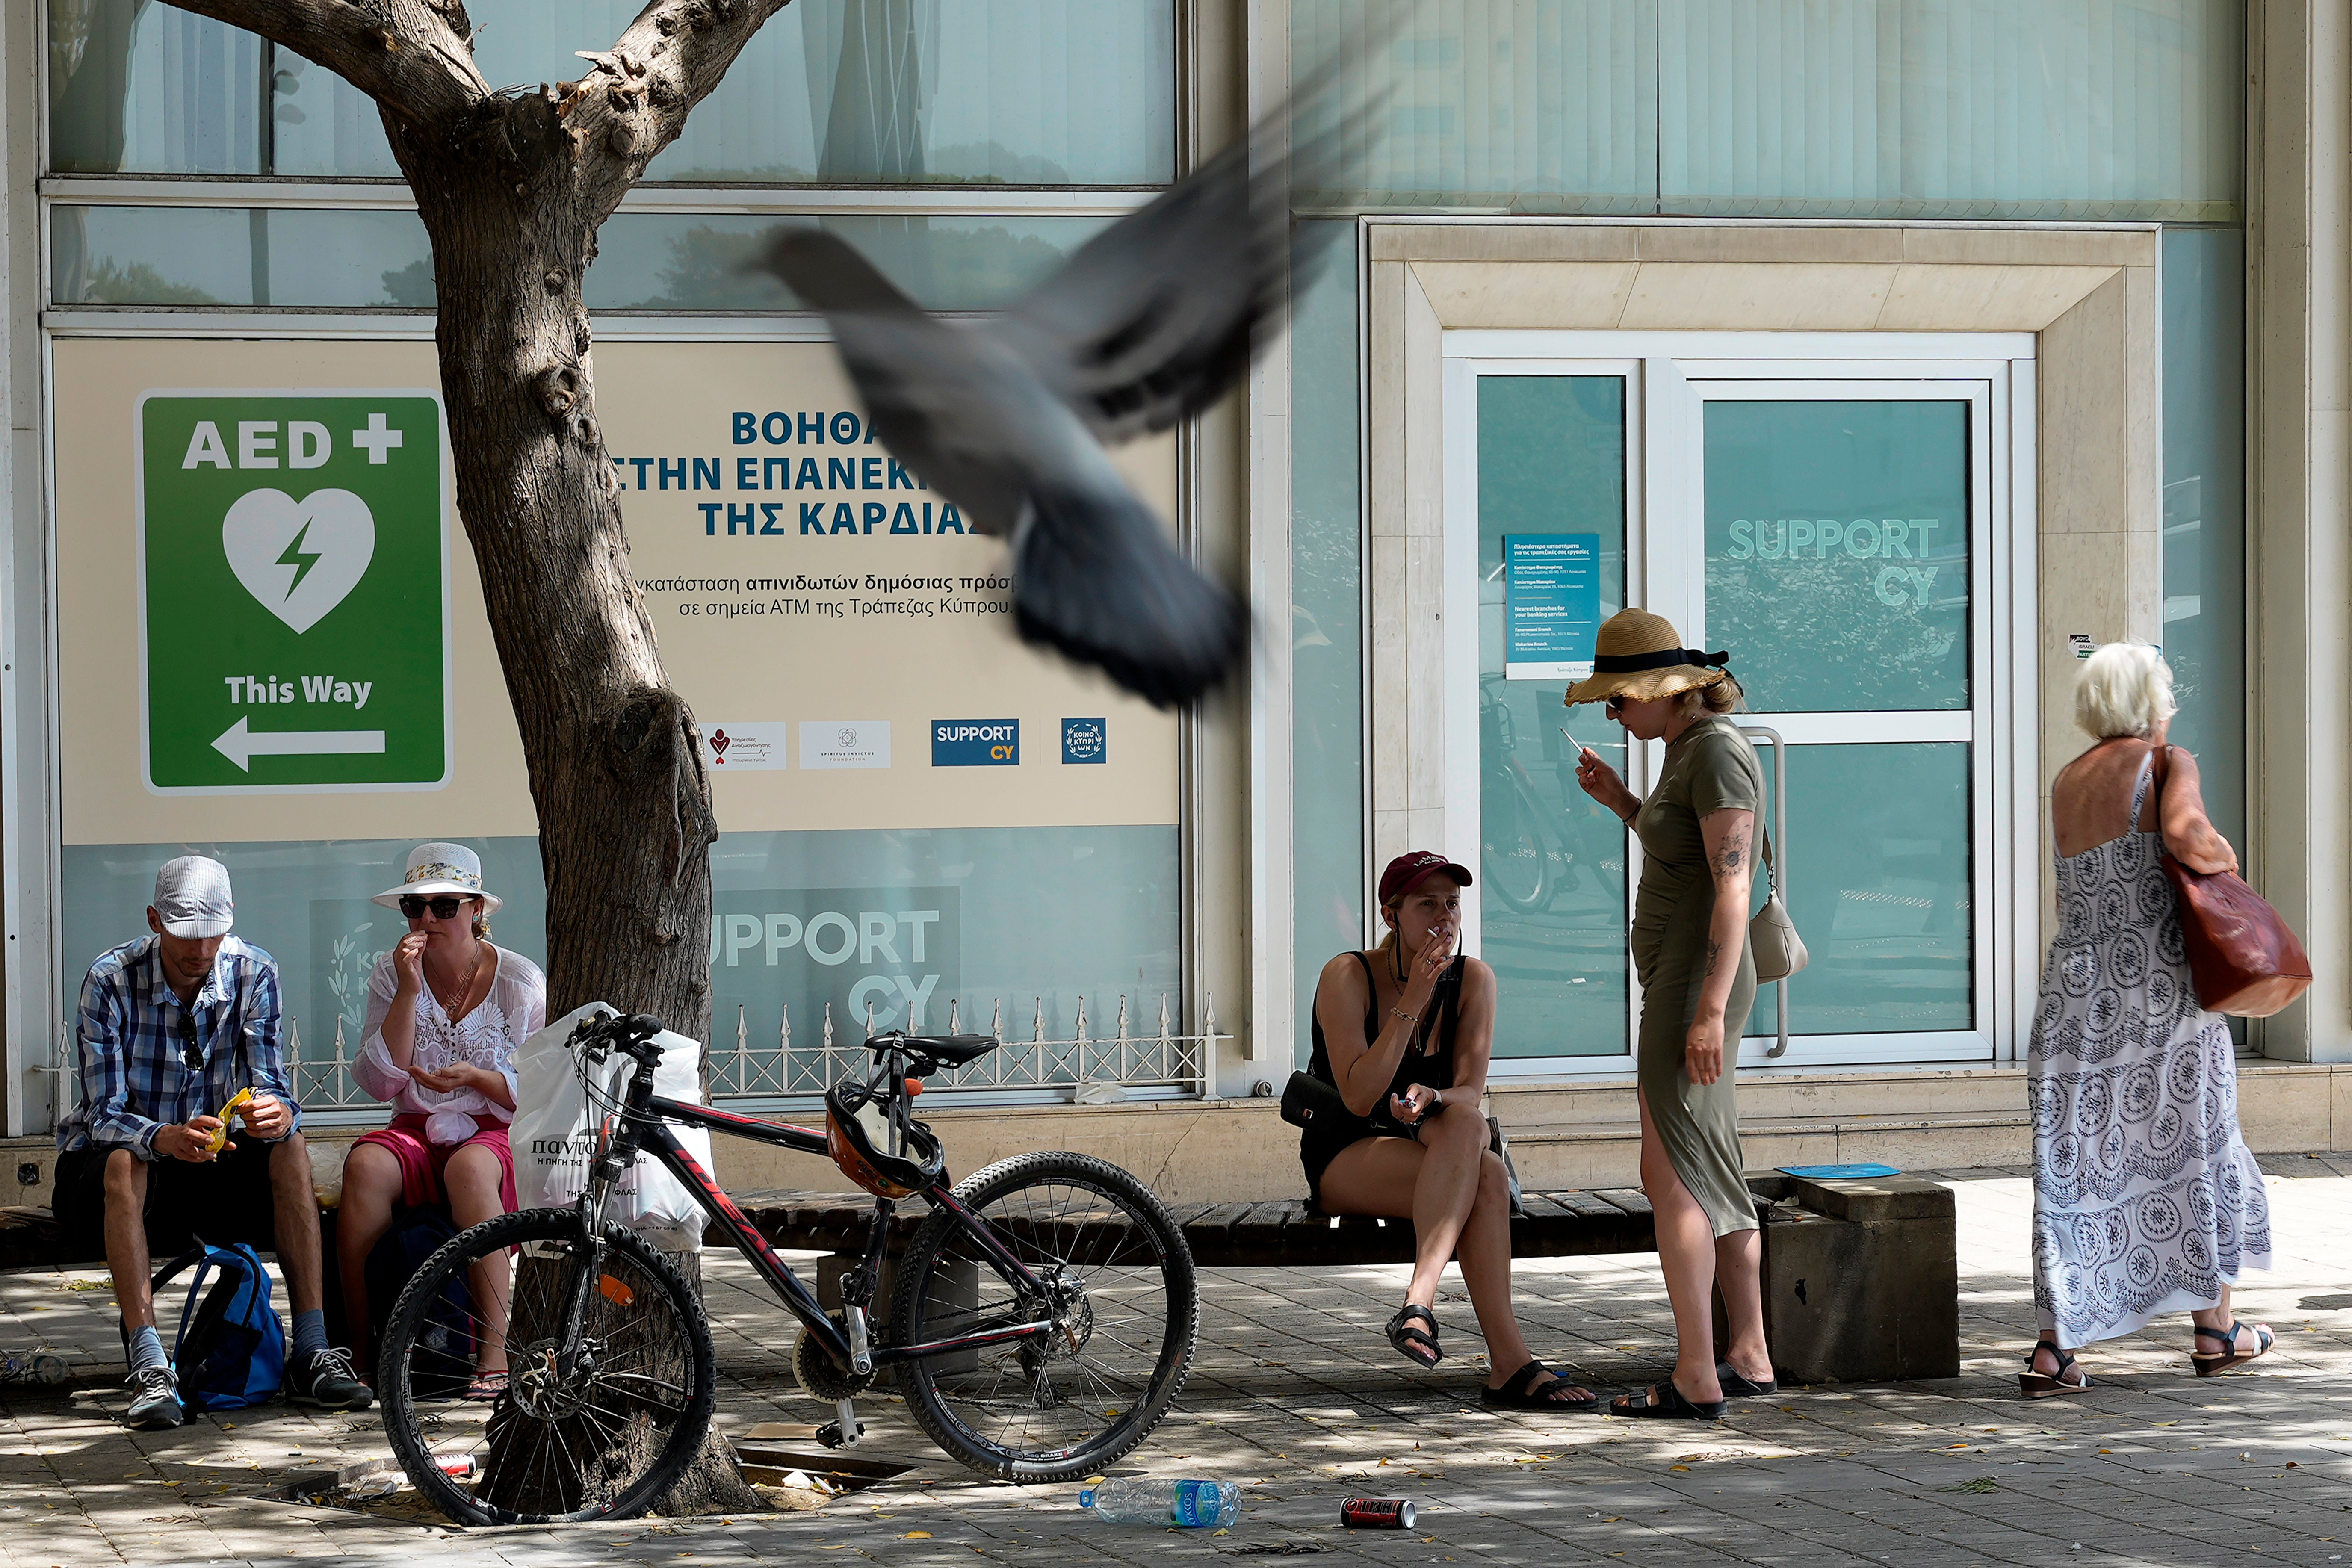 Tourists sit under a tree for shade amid hot weather at Eleftherias, Liberty, square in central capital Nicosia, Cyprus